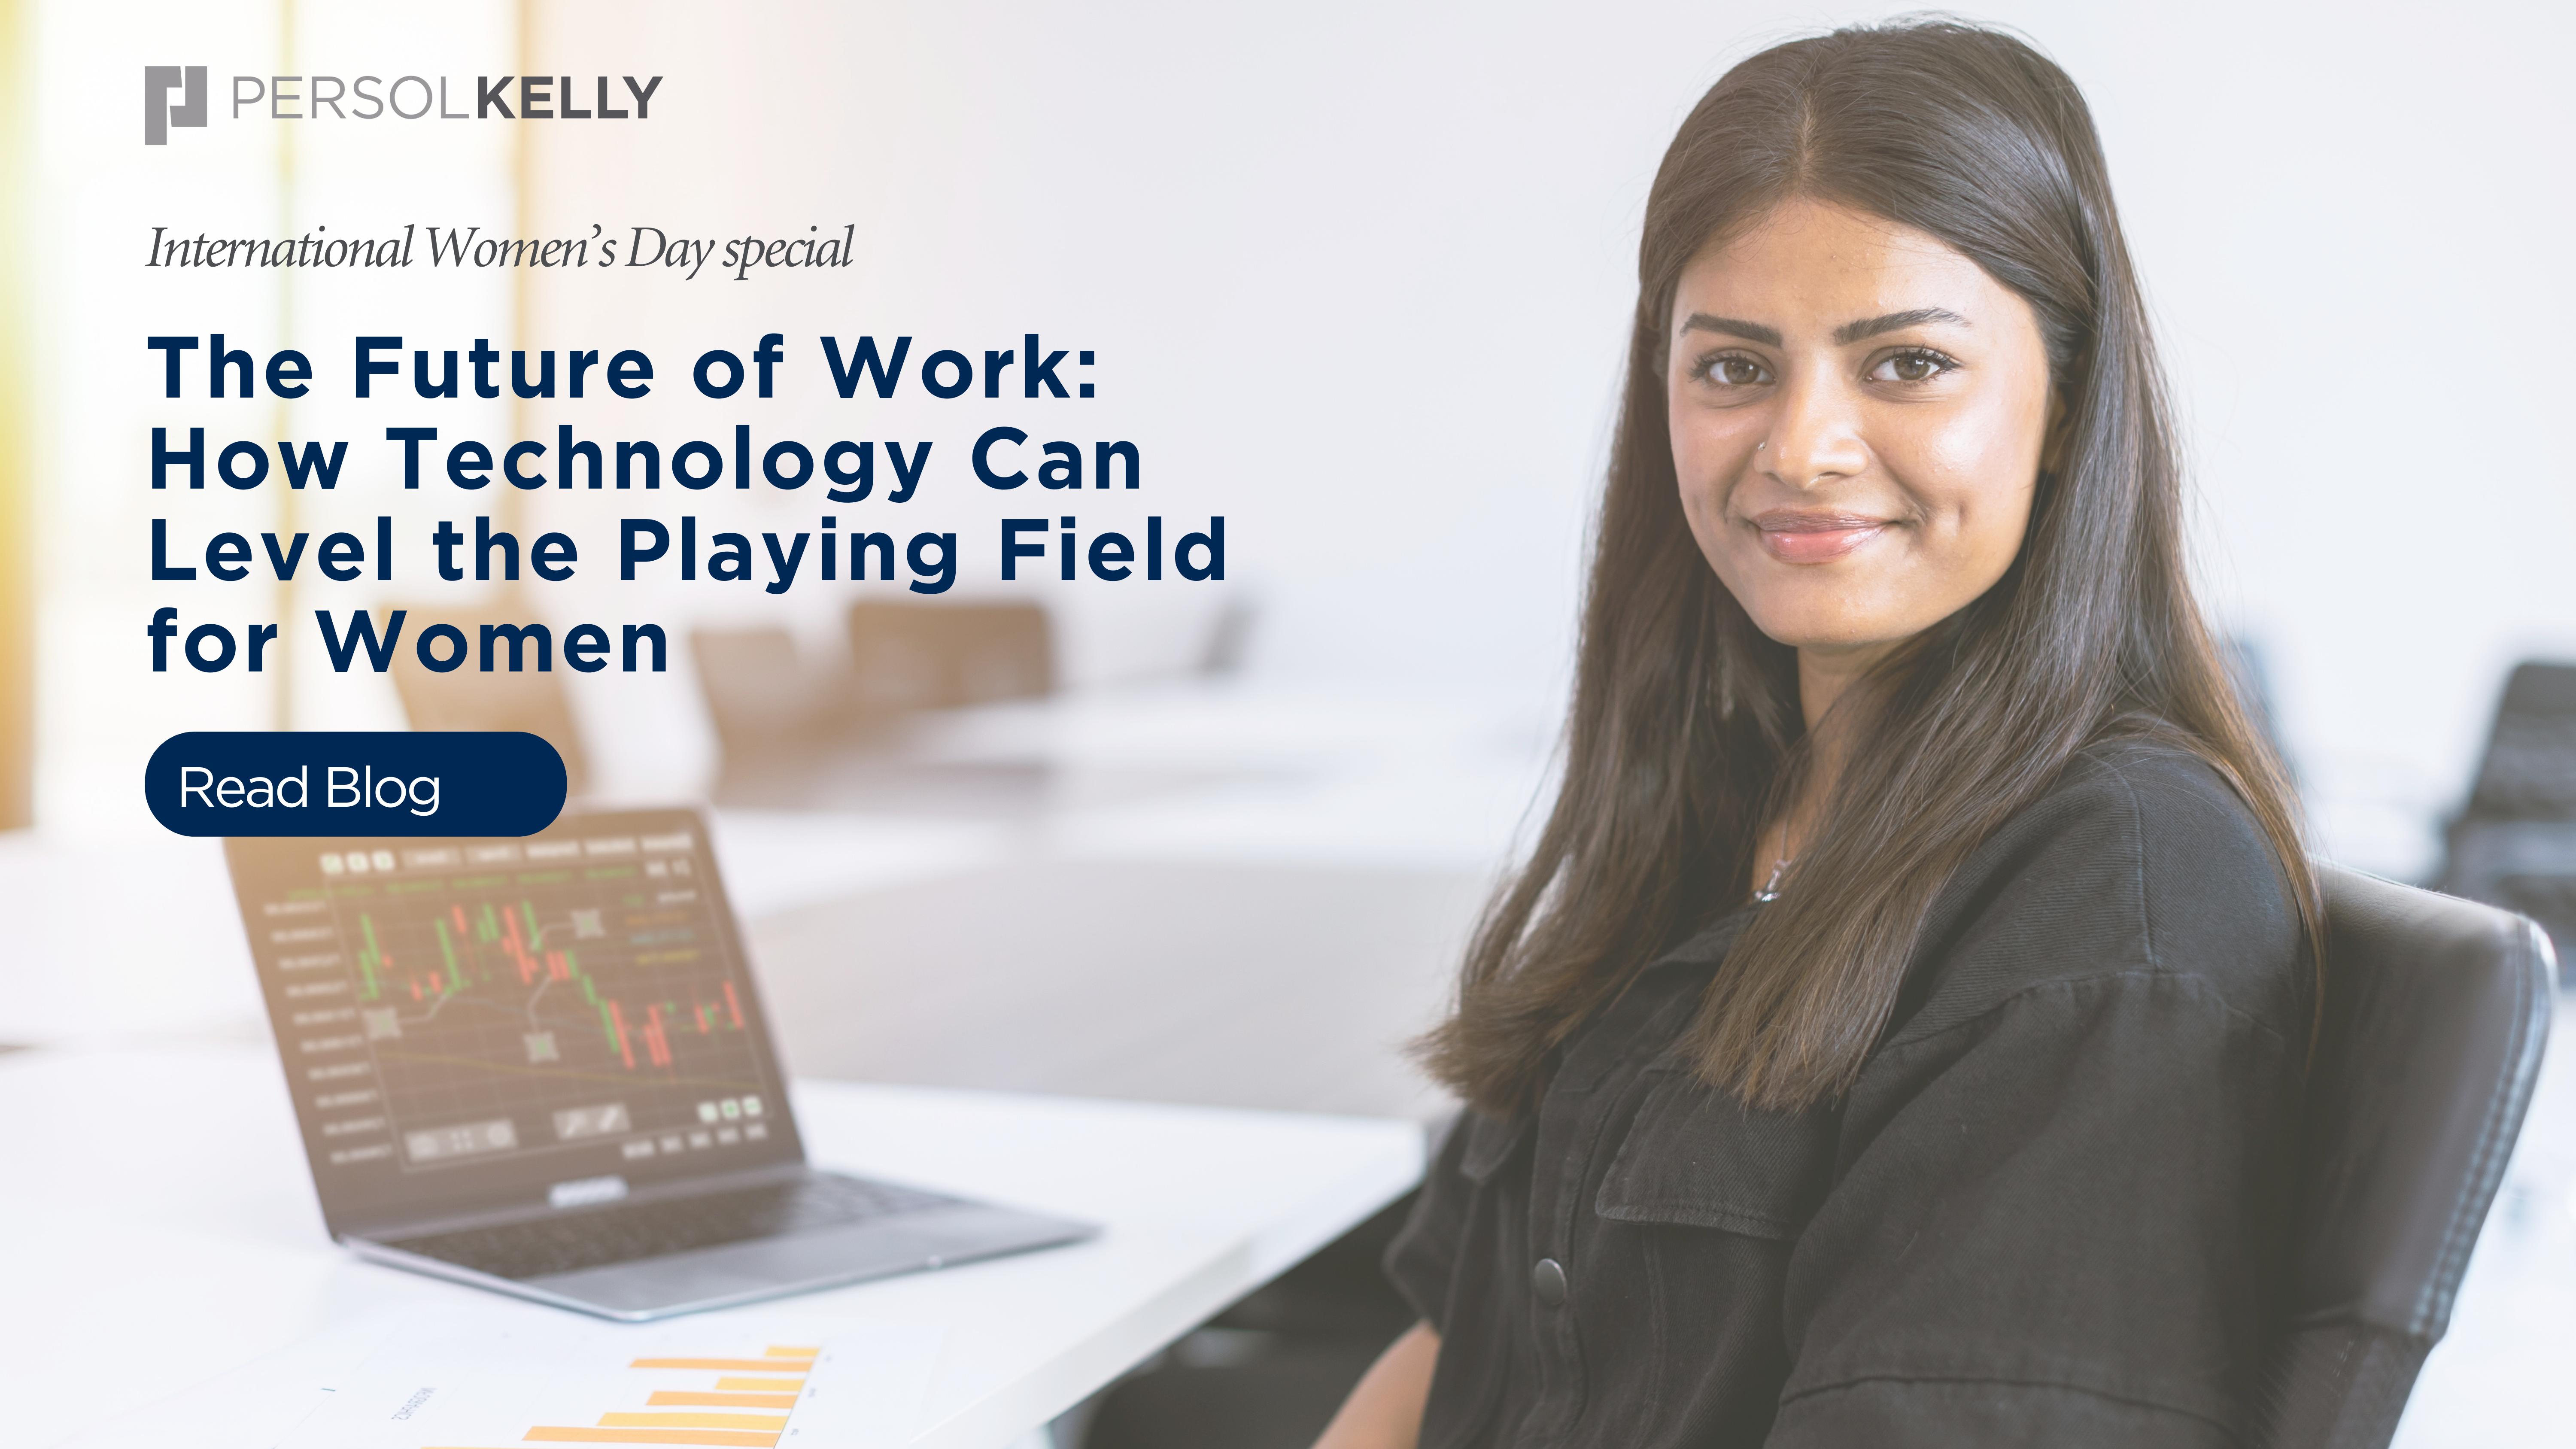 The Future of Work: How Technology Can Level the Playing Field for Women